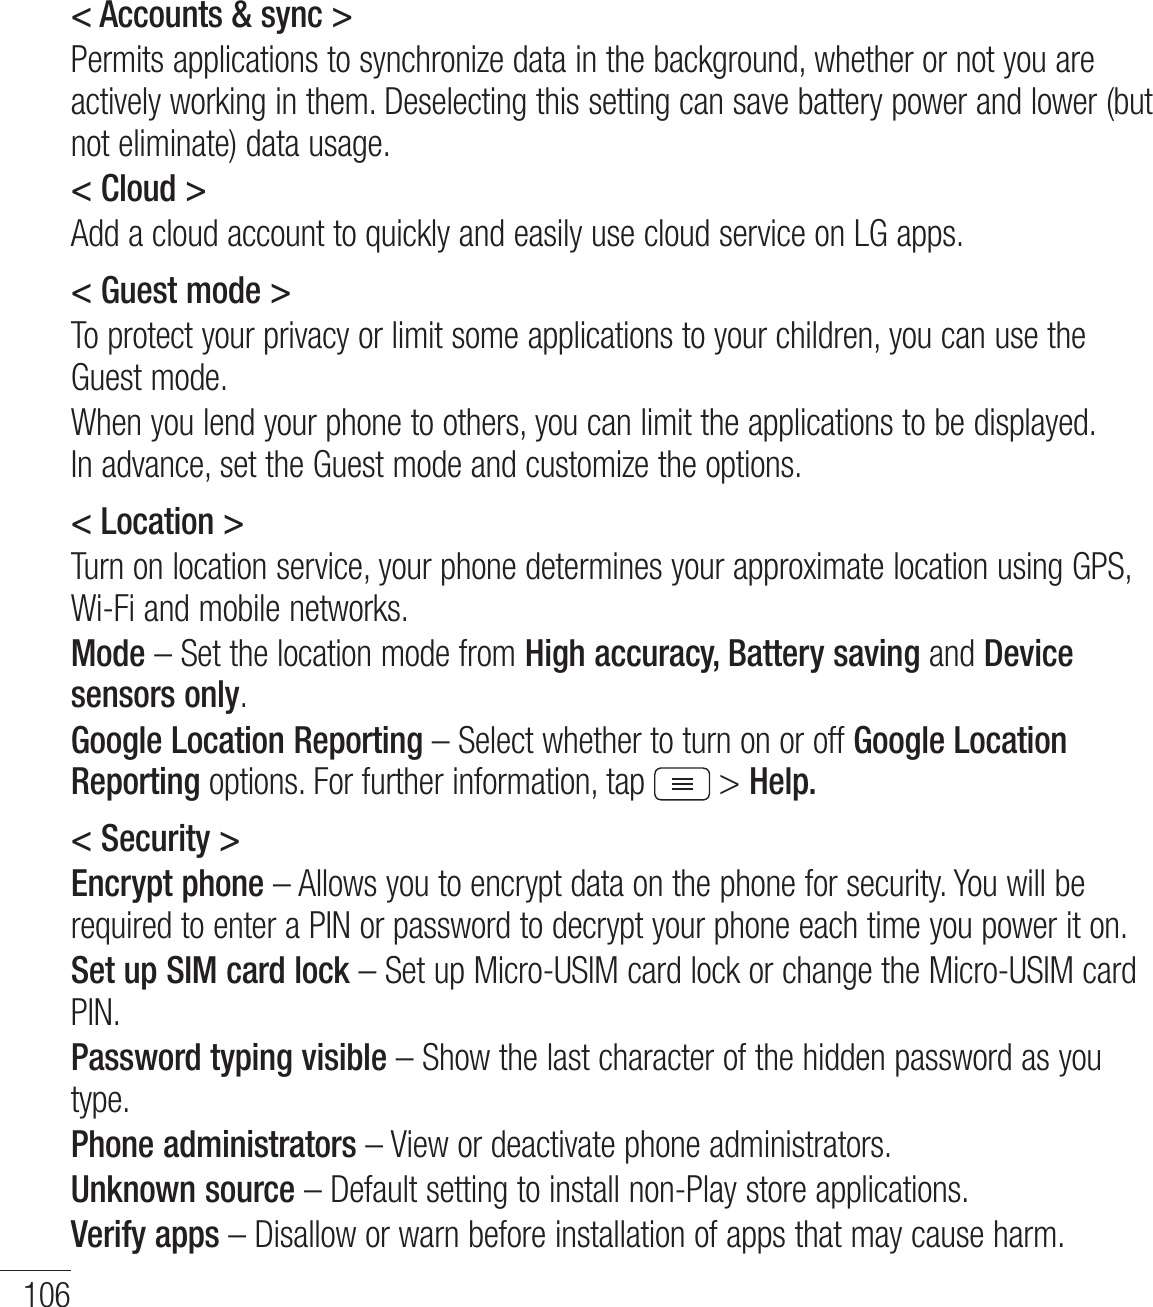 106Settings&lt; Accounts &amp; sync &gt;Permits applications to synchronize data in the background, whether or not you are actively working in them. Deselecting this setting can save battery power and lower (but  not eliminate) data usage.&lt; Cloud &gt;Add a cloud account to quickly and easily use cloud service on LG apps. &lt; Guest mode &gt;To protect your privacy or limit some applications to your children, you can use the Guest mode.When you lend your phone to others, you can limit the applications to be displayed. In advance, set the Guest mode and customize the options.&lt; Location &gt;Turn on location service, your phone determines your approximate location using GPS, Wi-Fi and mobile networks.Mode – Set the location mode from High accuracy, Battery saving and Device sensors only.Google Location Reporting – Select whether to turn on or off Google Location Reporting options. For further information, tap  &gt; Help.&lt; Security &gt;Encrypt phone – Allows you to encrypt data on the phone for security. You will be required to enter a PIN or password to decrypt your phone each time you power it on.Set up SIM card lock – Set up Micro-USIM card lock or change the Micro-USIM card PIN.Password typing visible – Show the last character of the hidden password as you type.Phone administrators – View or deactivate phone administrators.Unknown source – Default setting to install non-Play store applications.Verify apps – Disallow or warn before installation of apps that may cause harm.